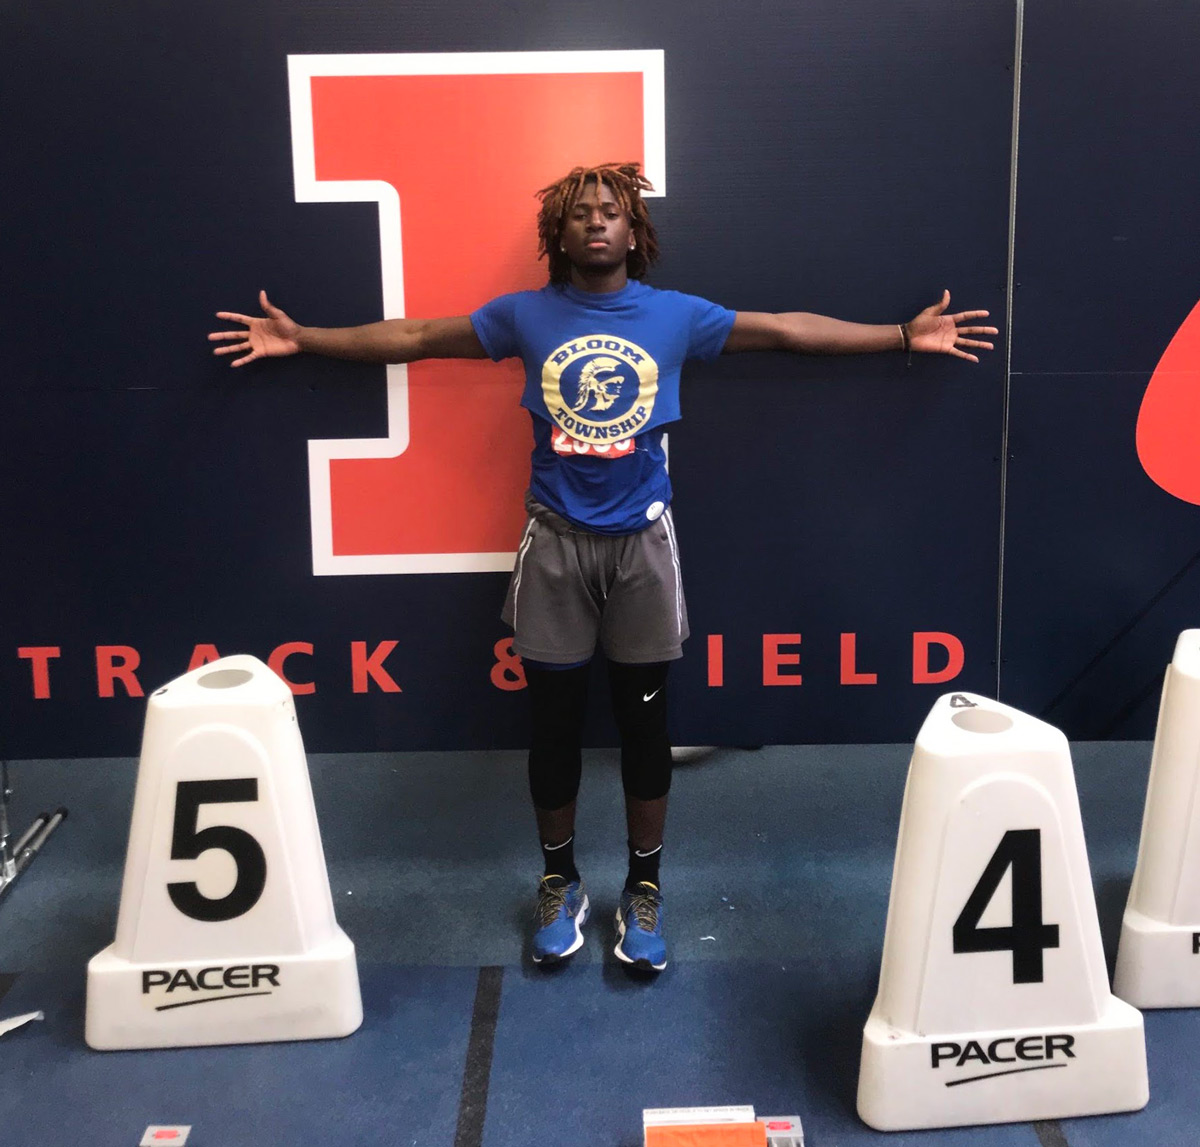 Samuel, arms outstretched, representing Illinois Track & Field